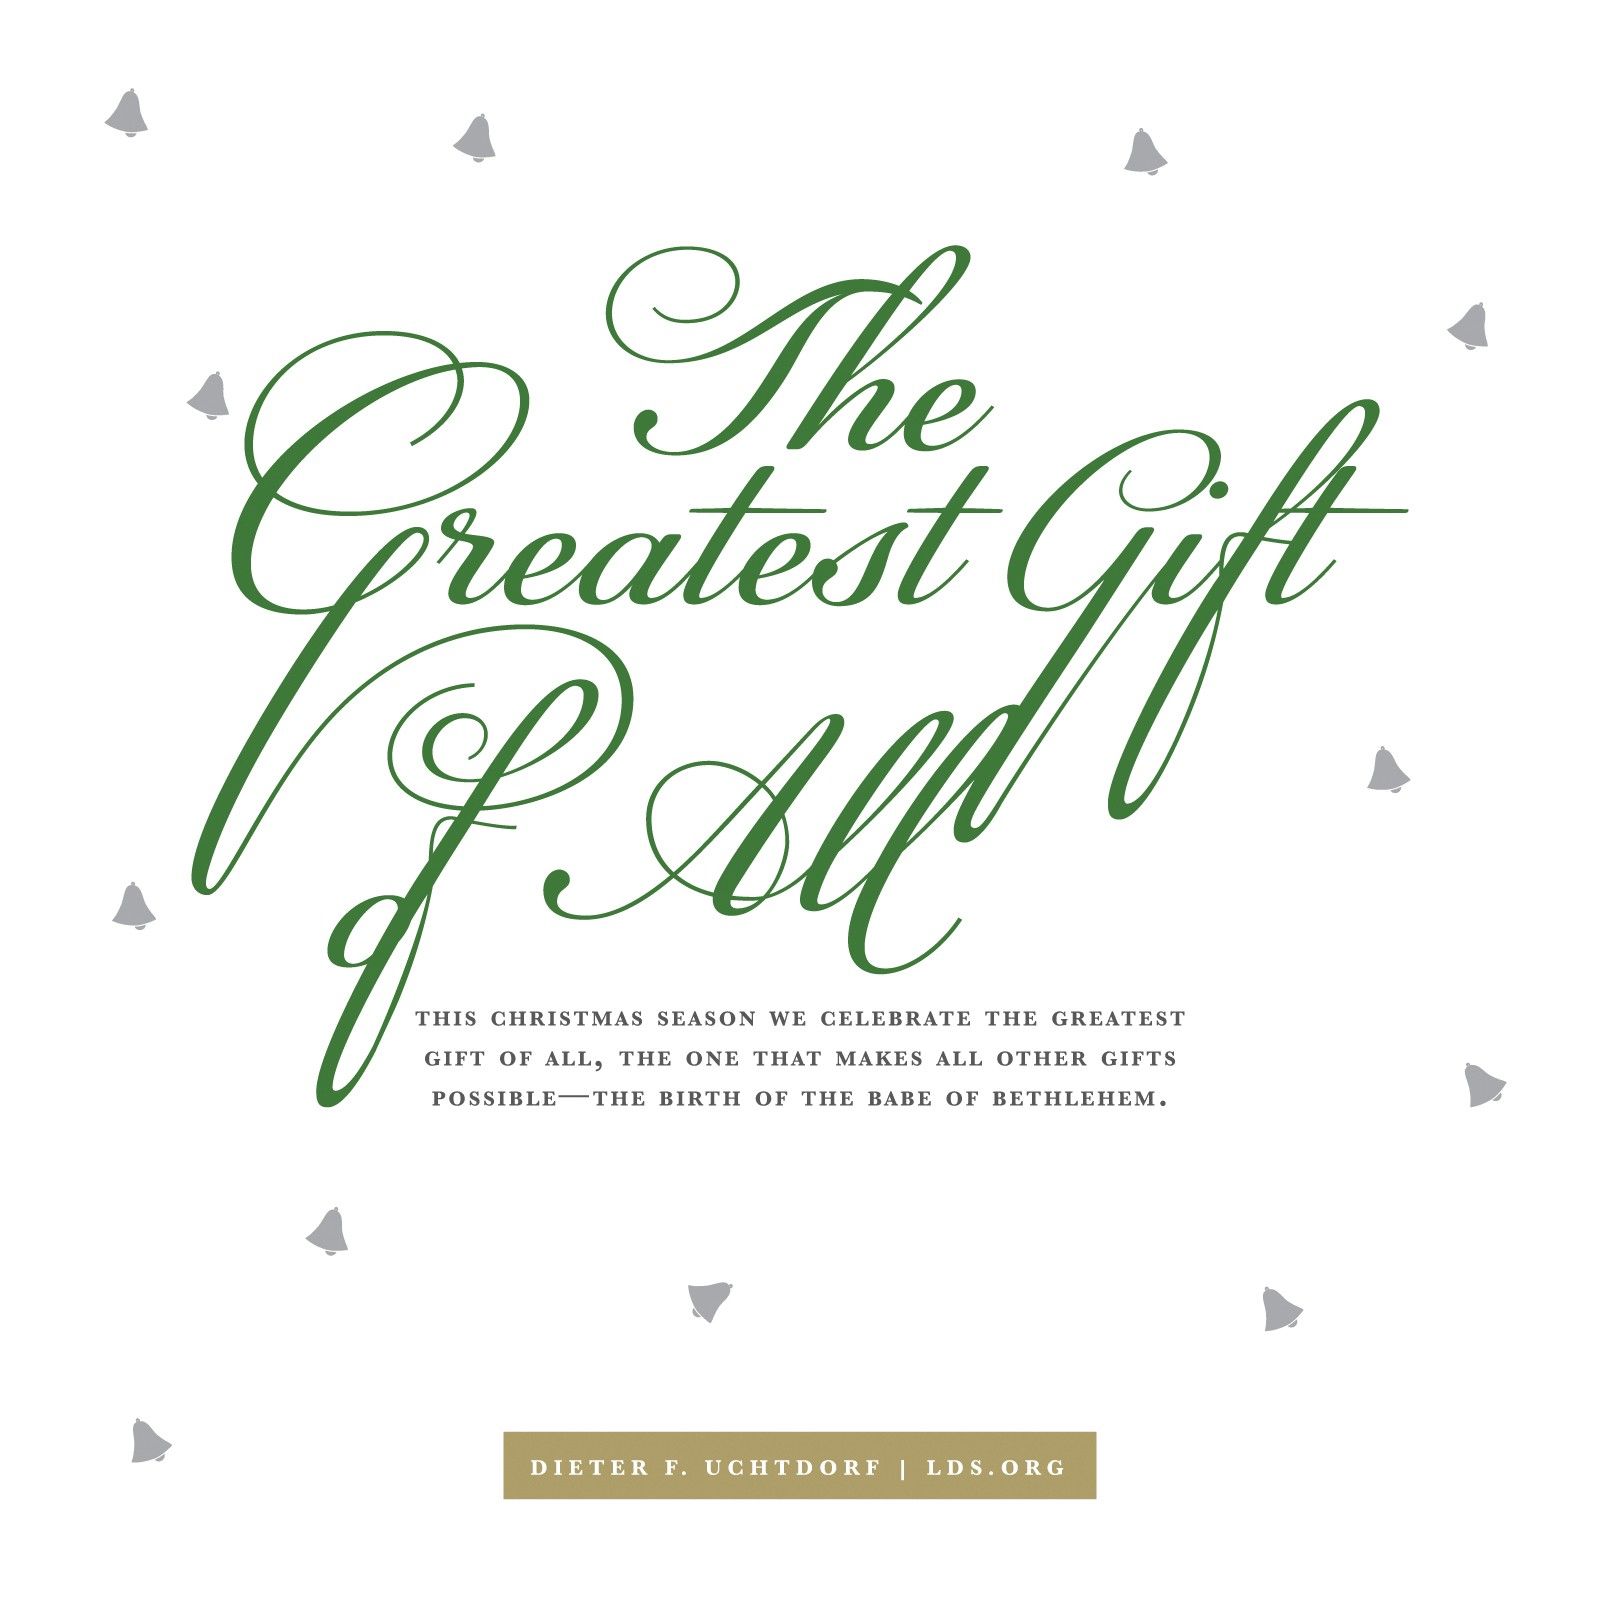 “This Christmas season we celebrate the greatest gift of all, the one that makes all other gifts possible—the birth of the babe of Bethlehem.” —President Dieter F. Uchtdorf, “The Generous One”